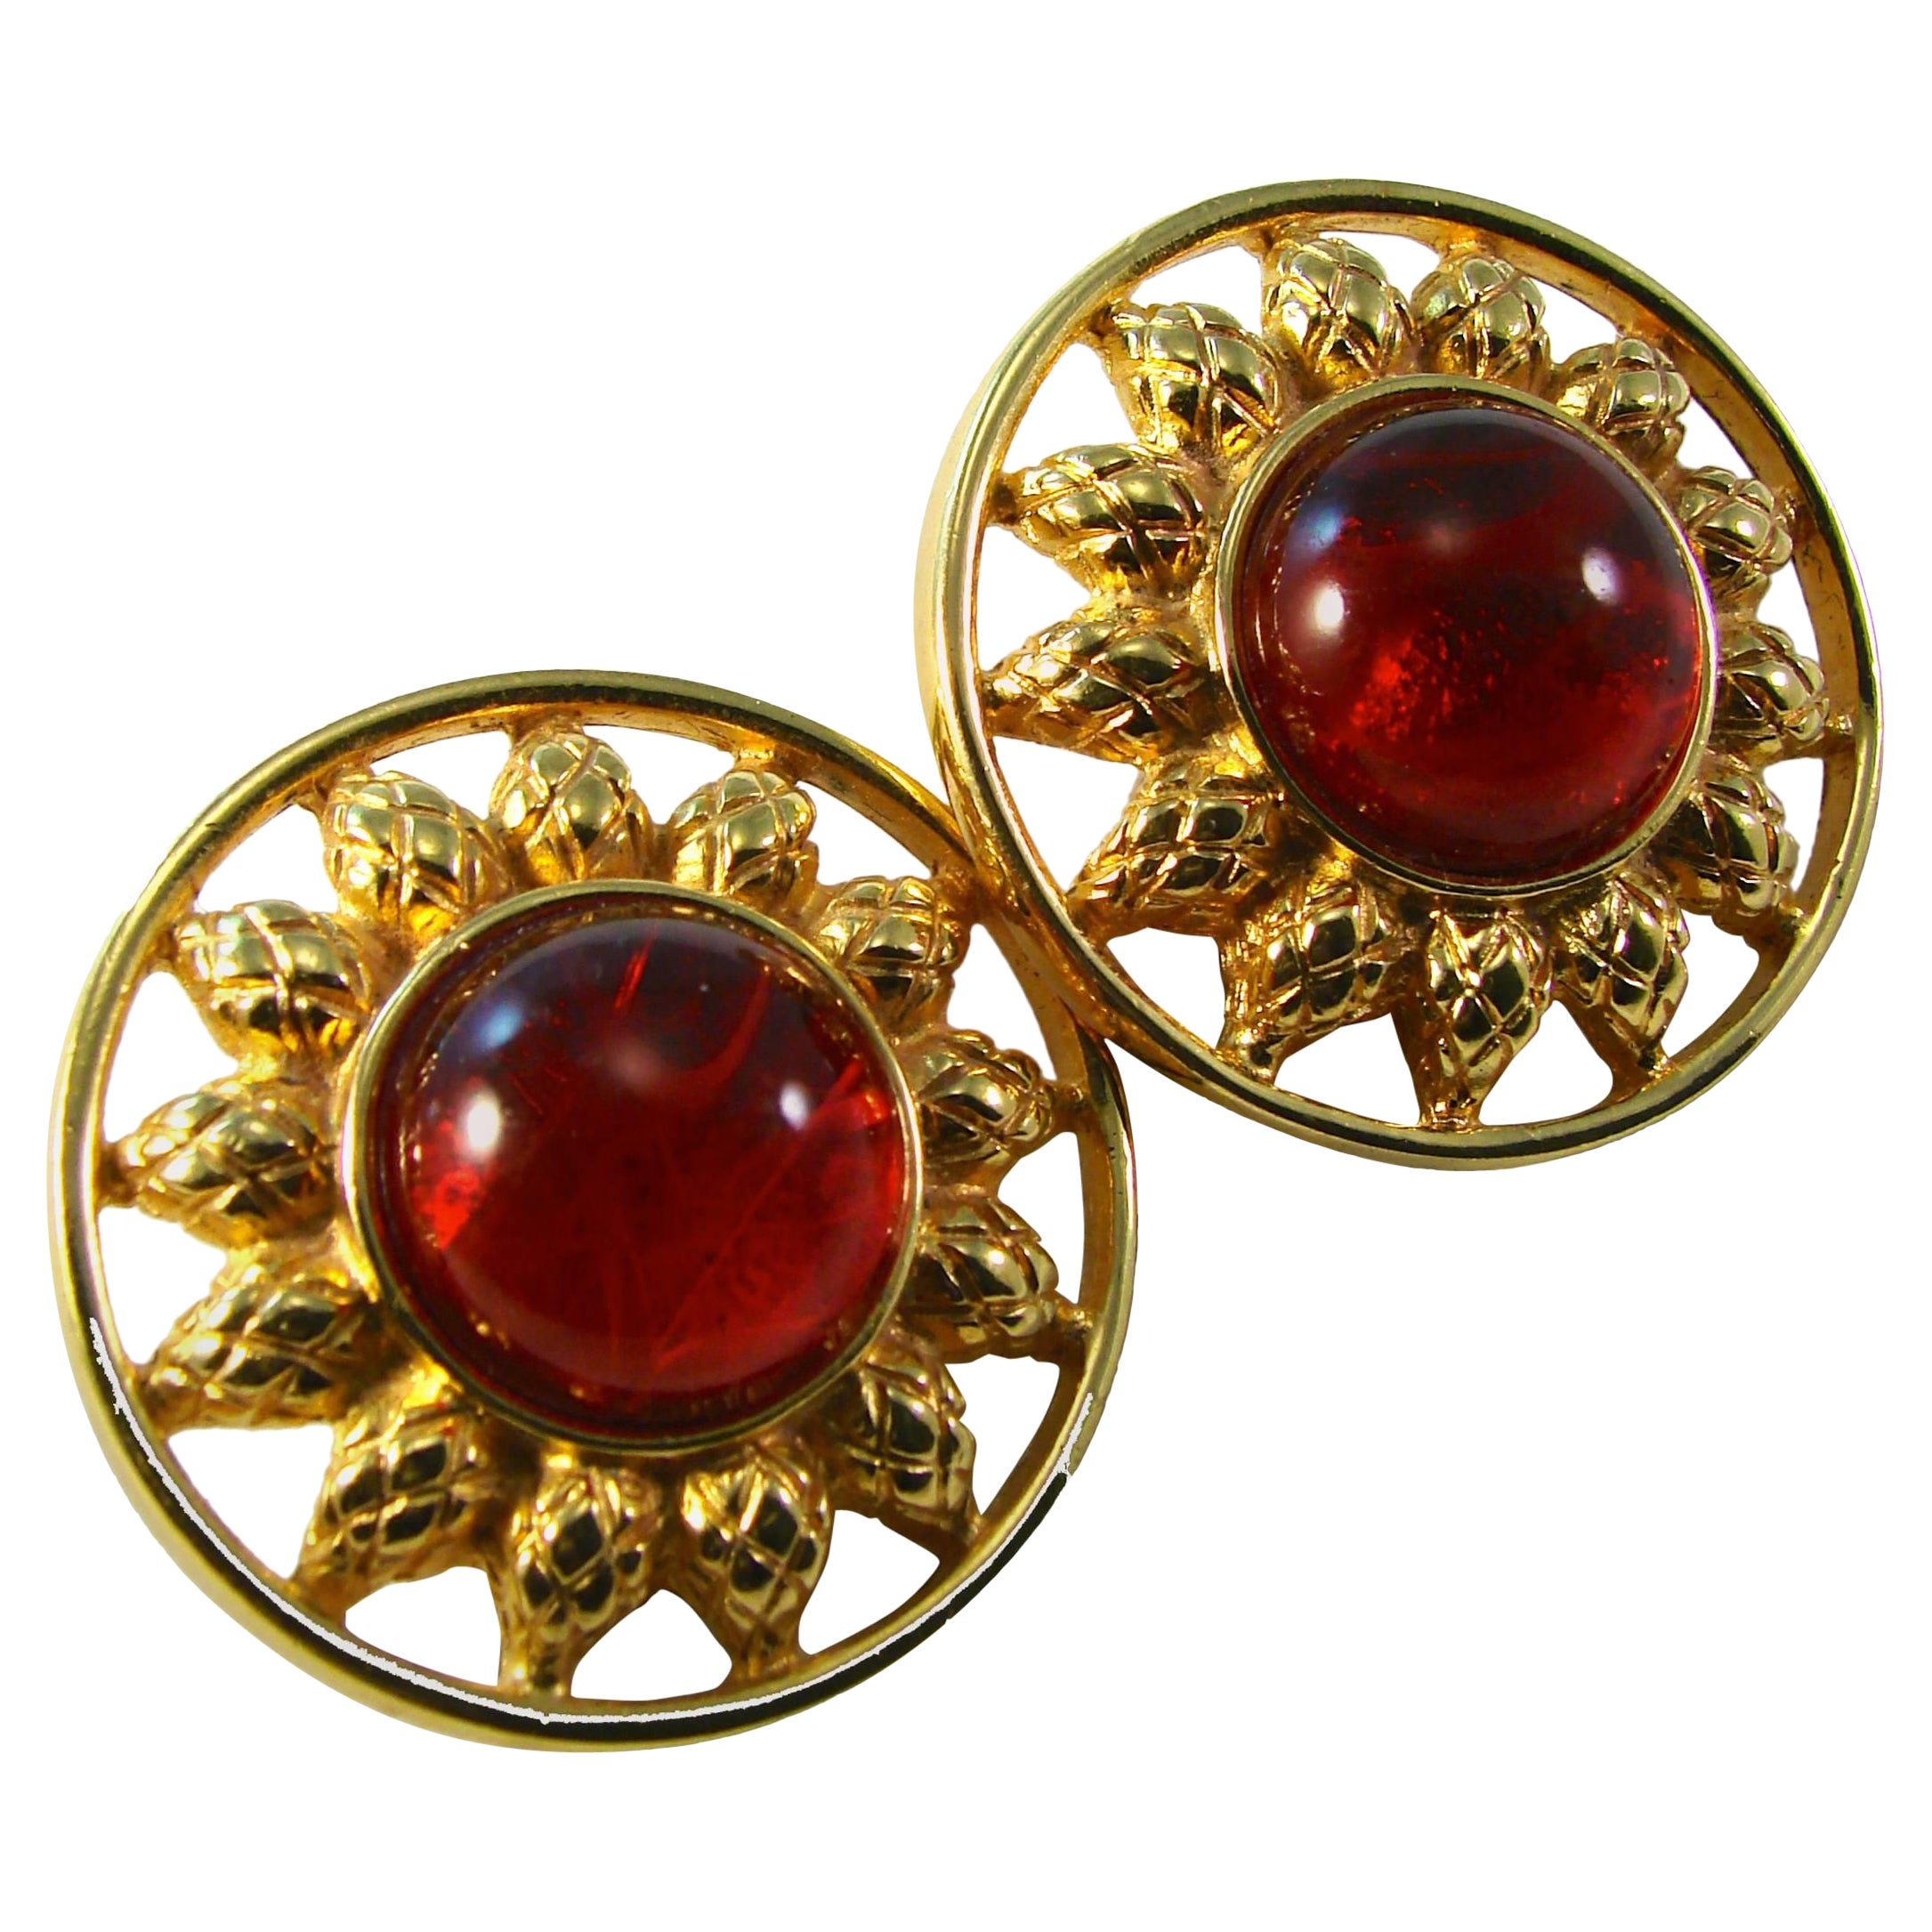 Fendi Earrings Gold Metal Sun Figural Red Glass Cabochon Center Vintage 1980s 